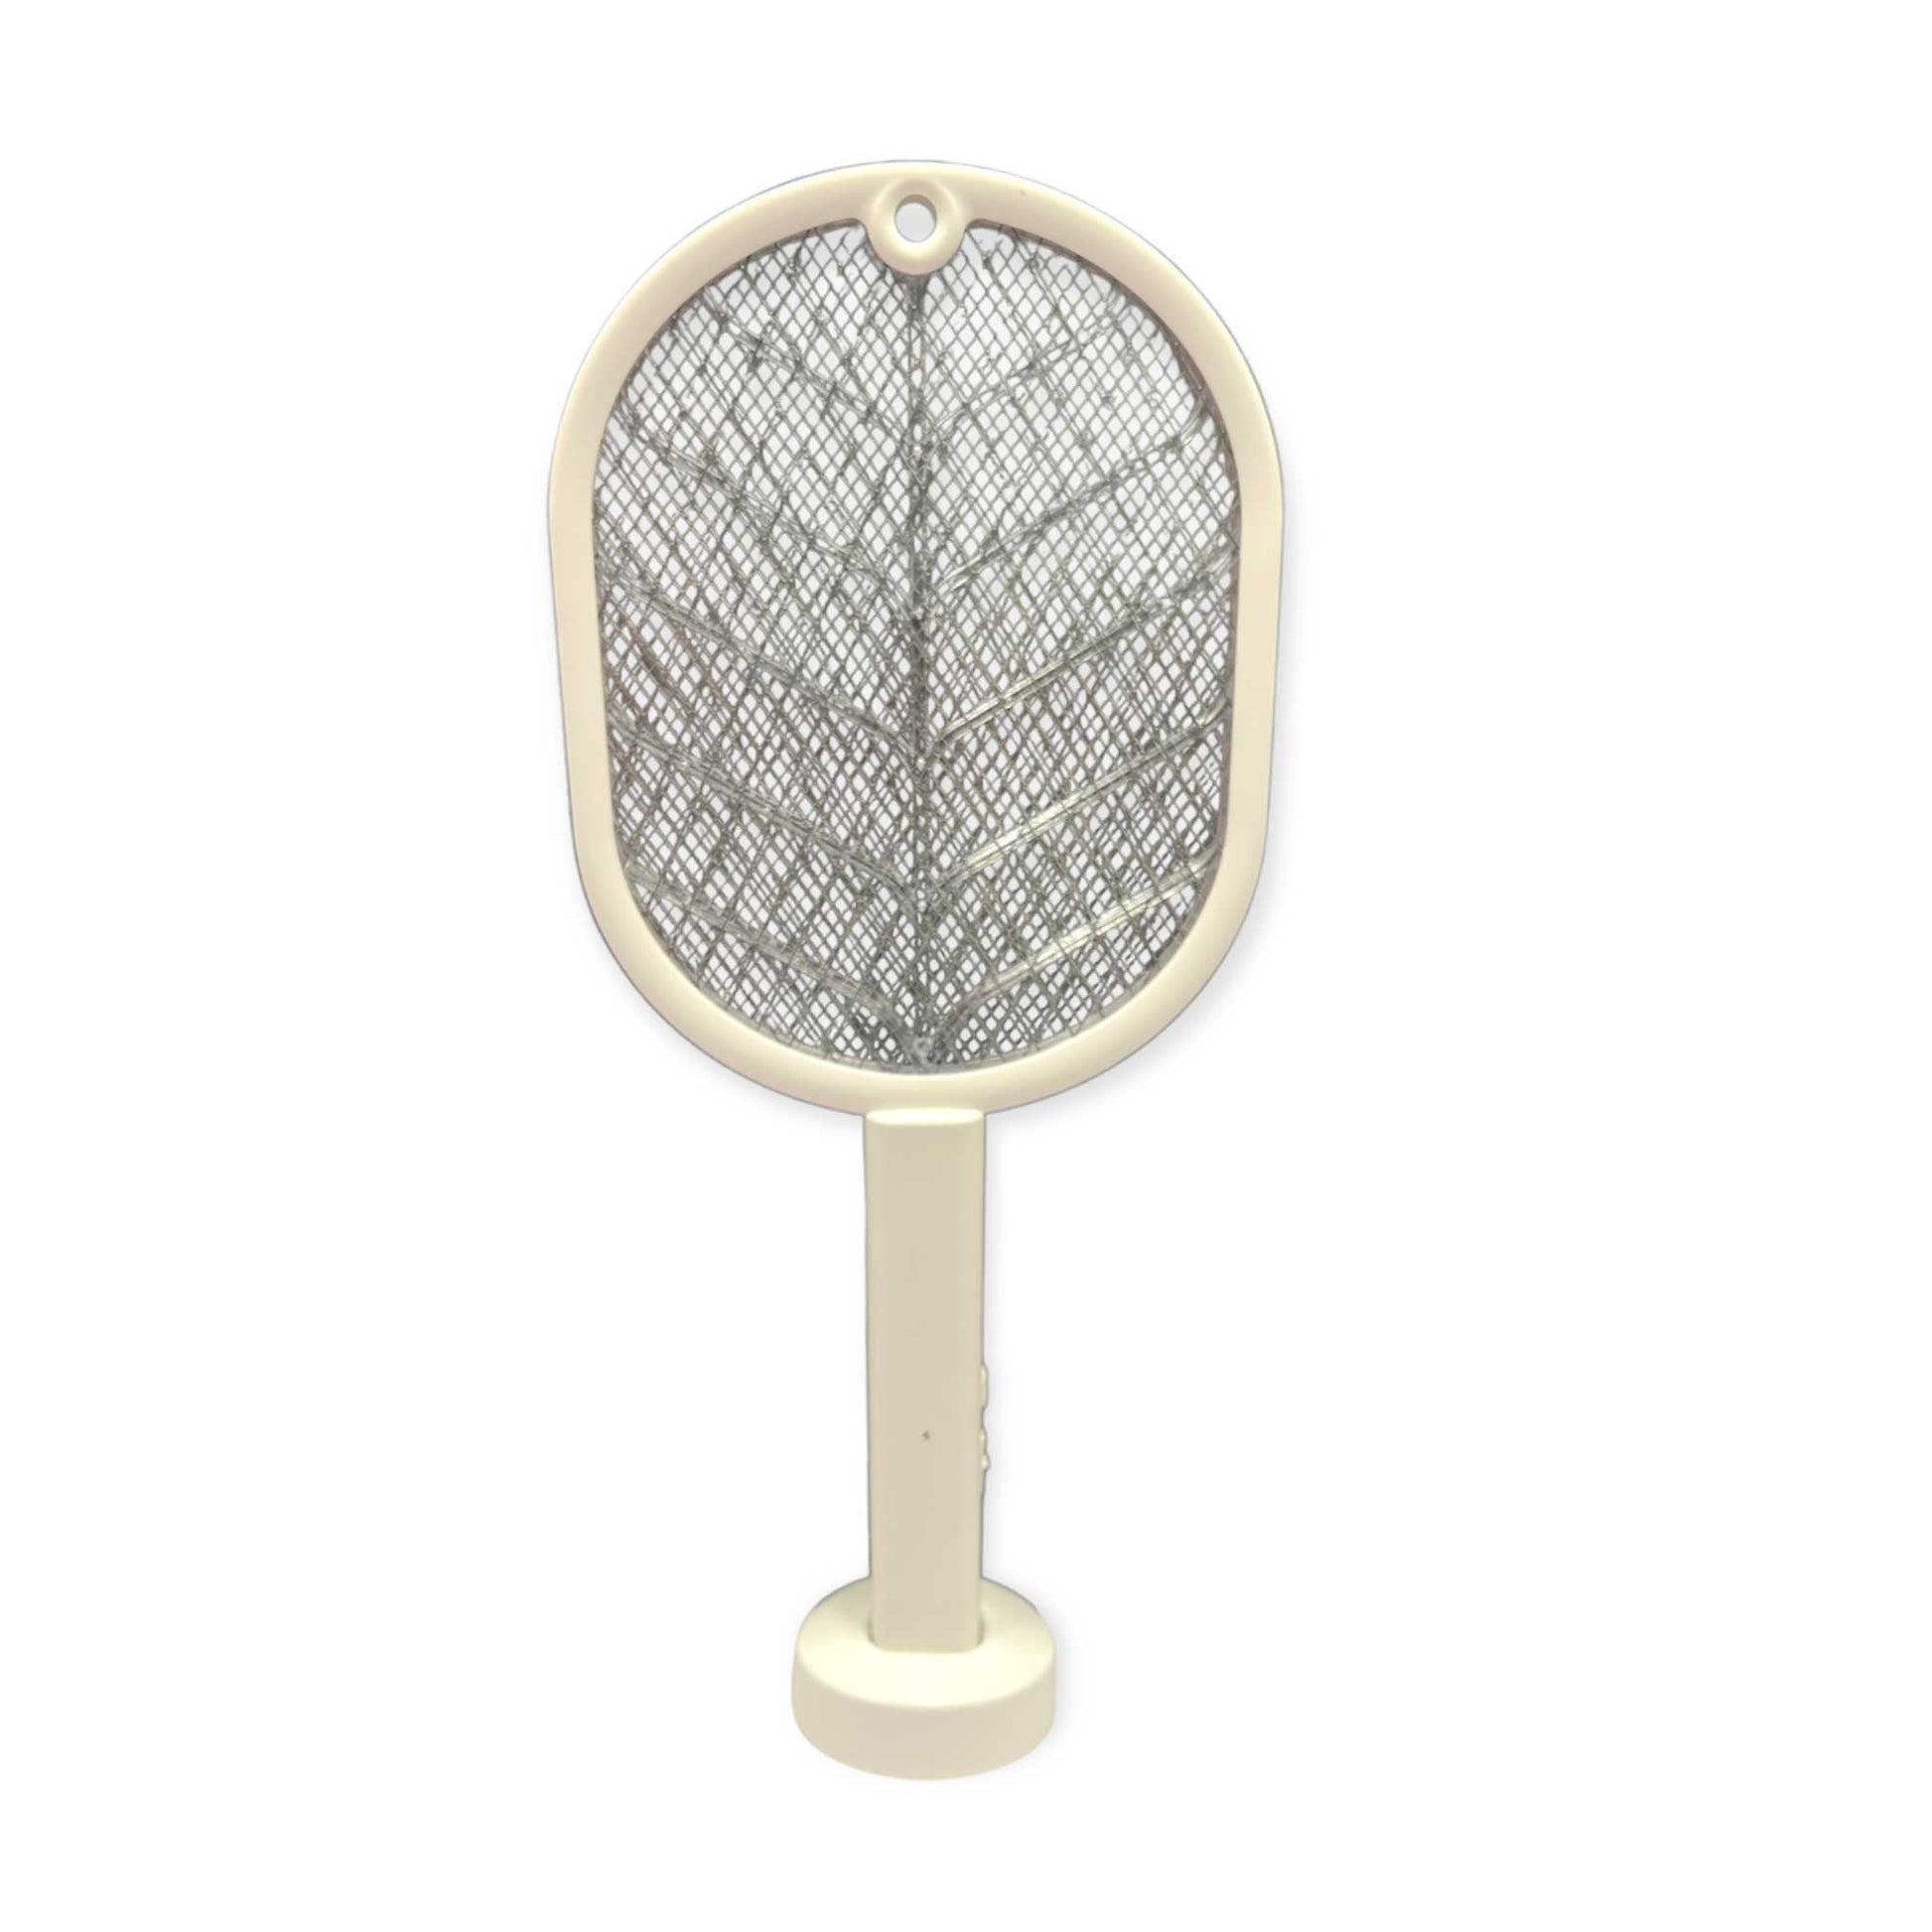 2 in 1 Rechargeable Mosquito Swatter - Electronic Fly Insect Bug Zapper Racket